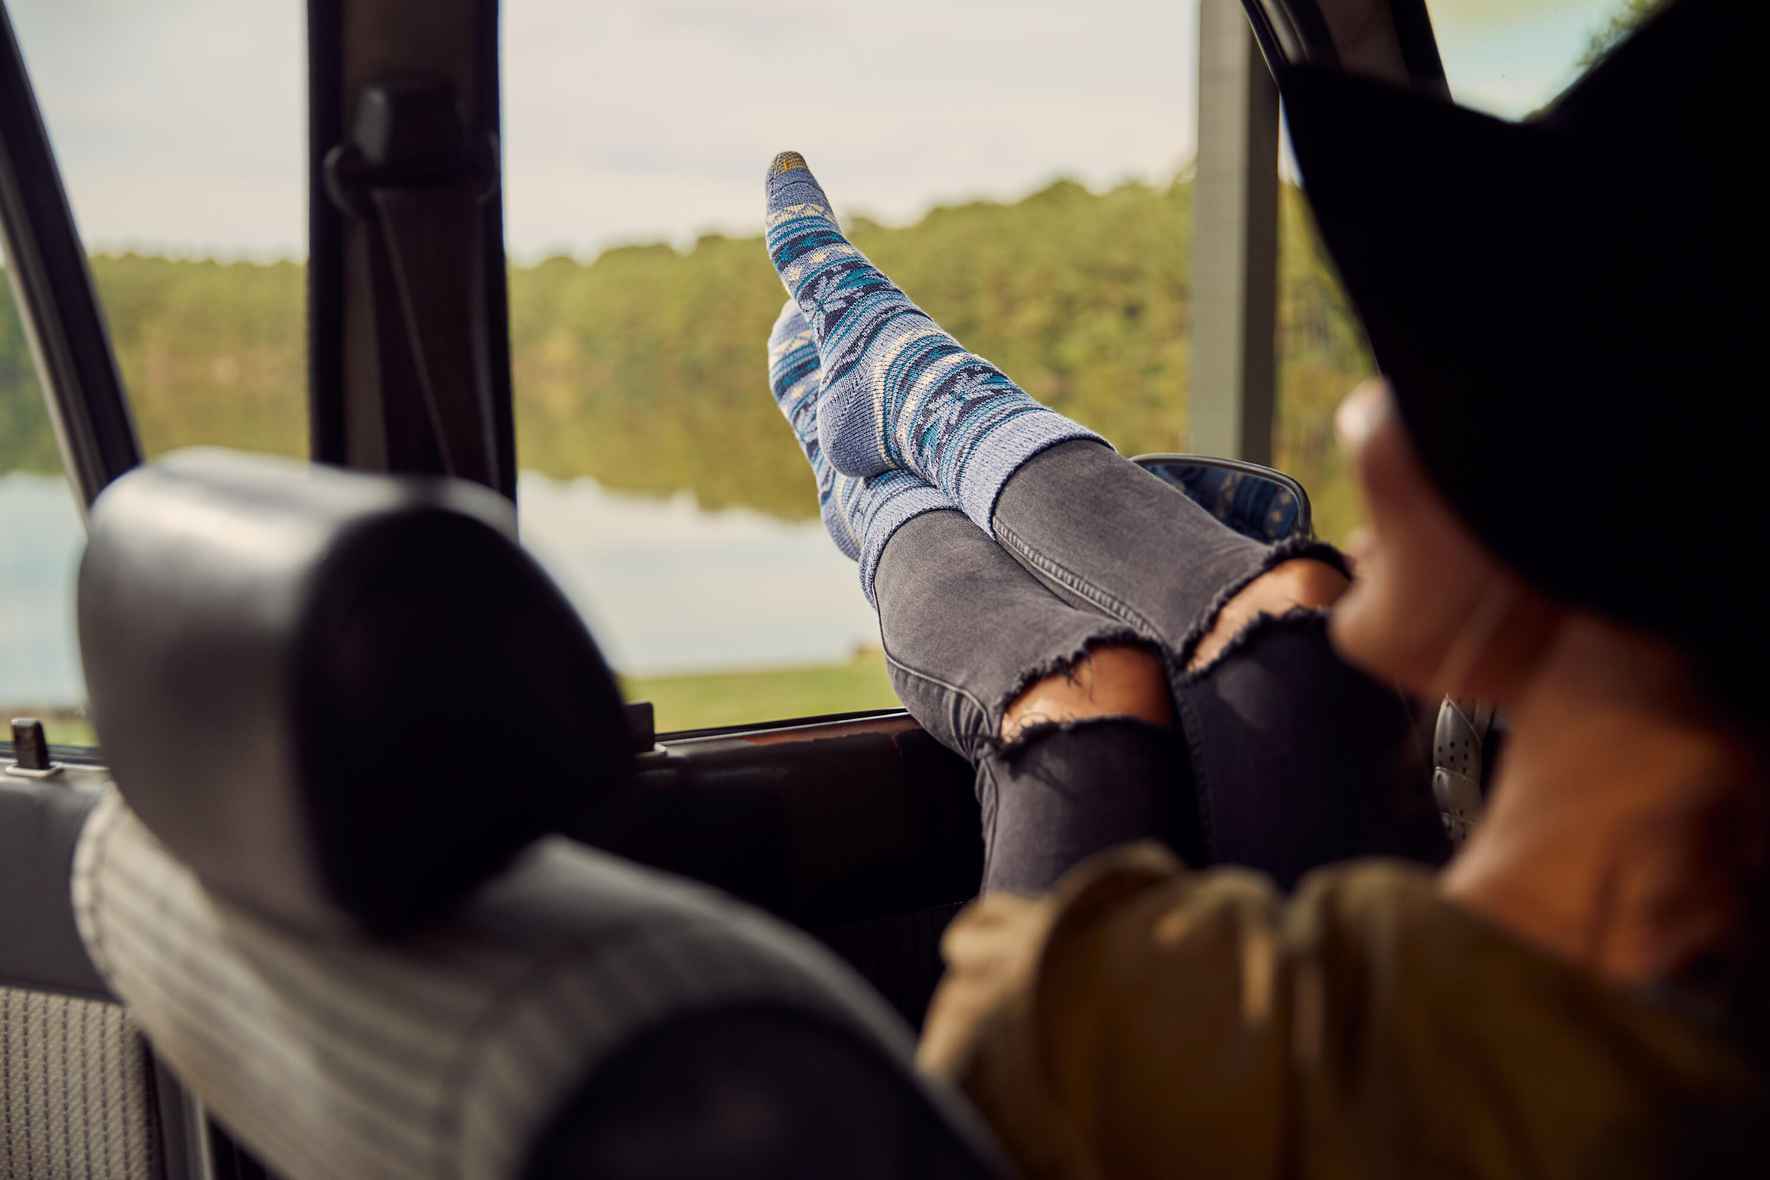 A woman with blue socks has her feet out the car window with the GOLDTOE™ logo in the center.